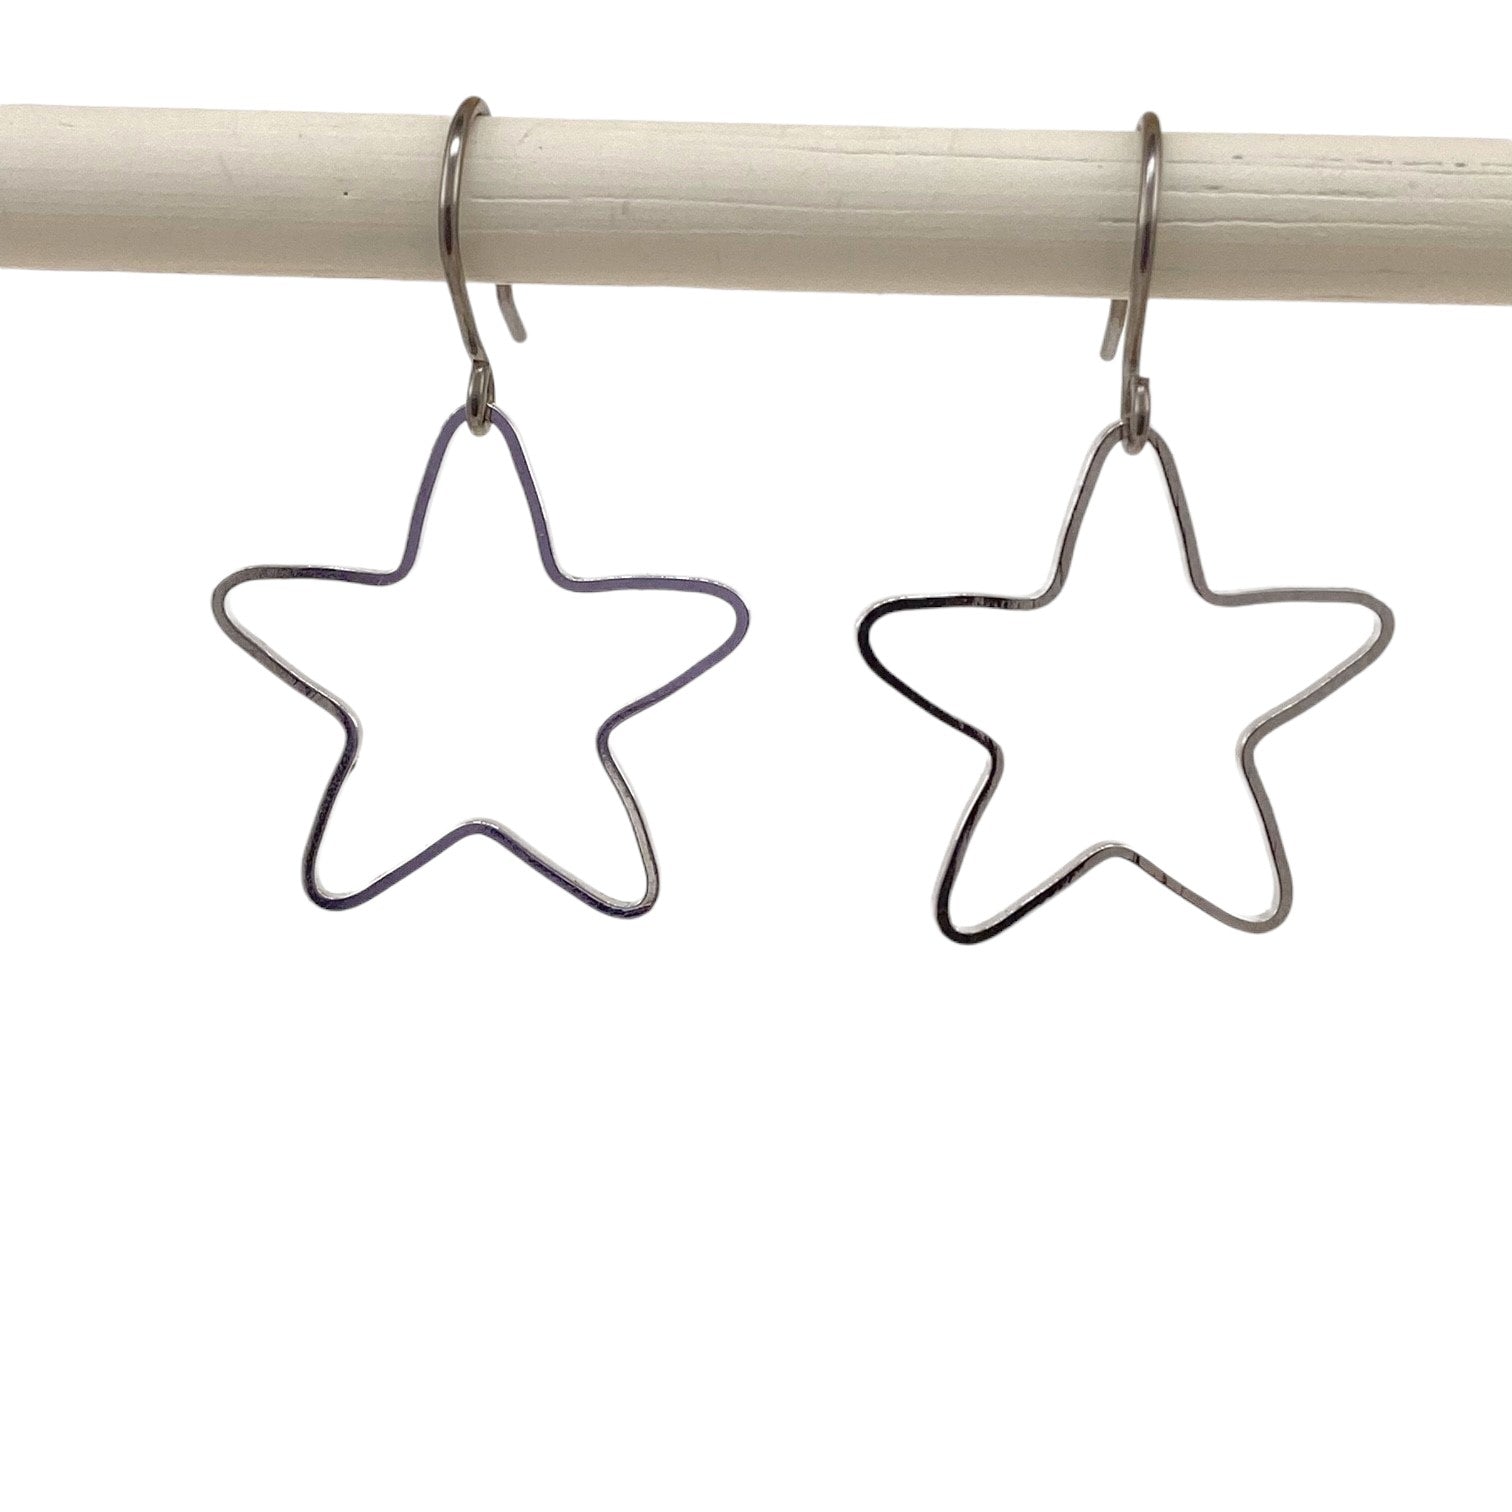 Minimal Silver Star Titanium Earrings - Truly Hypoallergenic | Just-ti